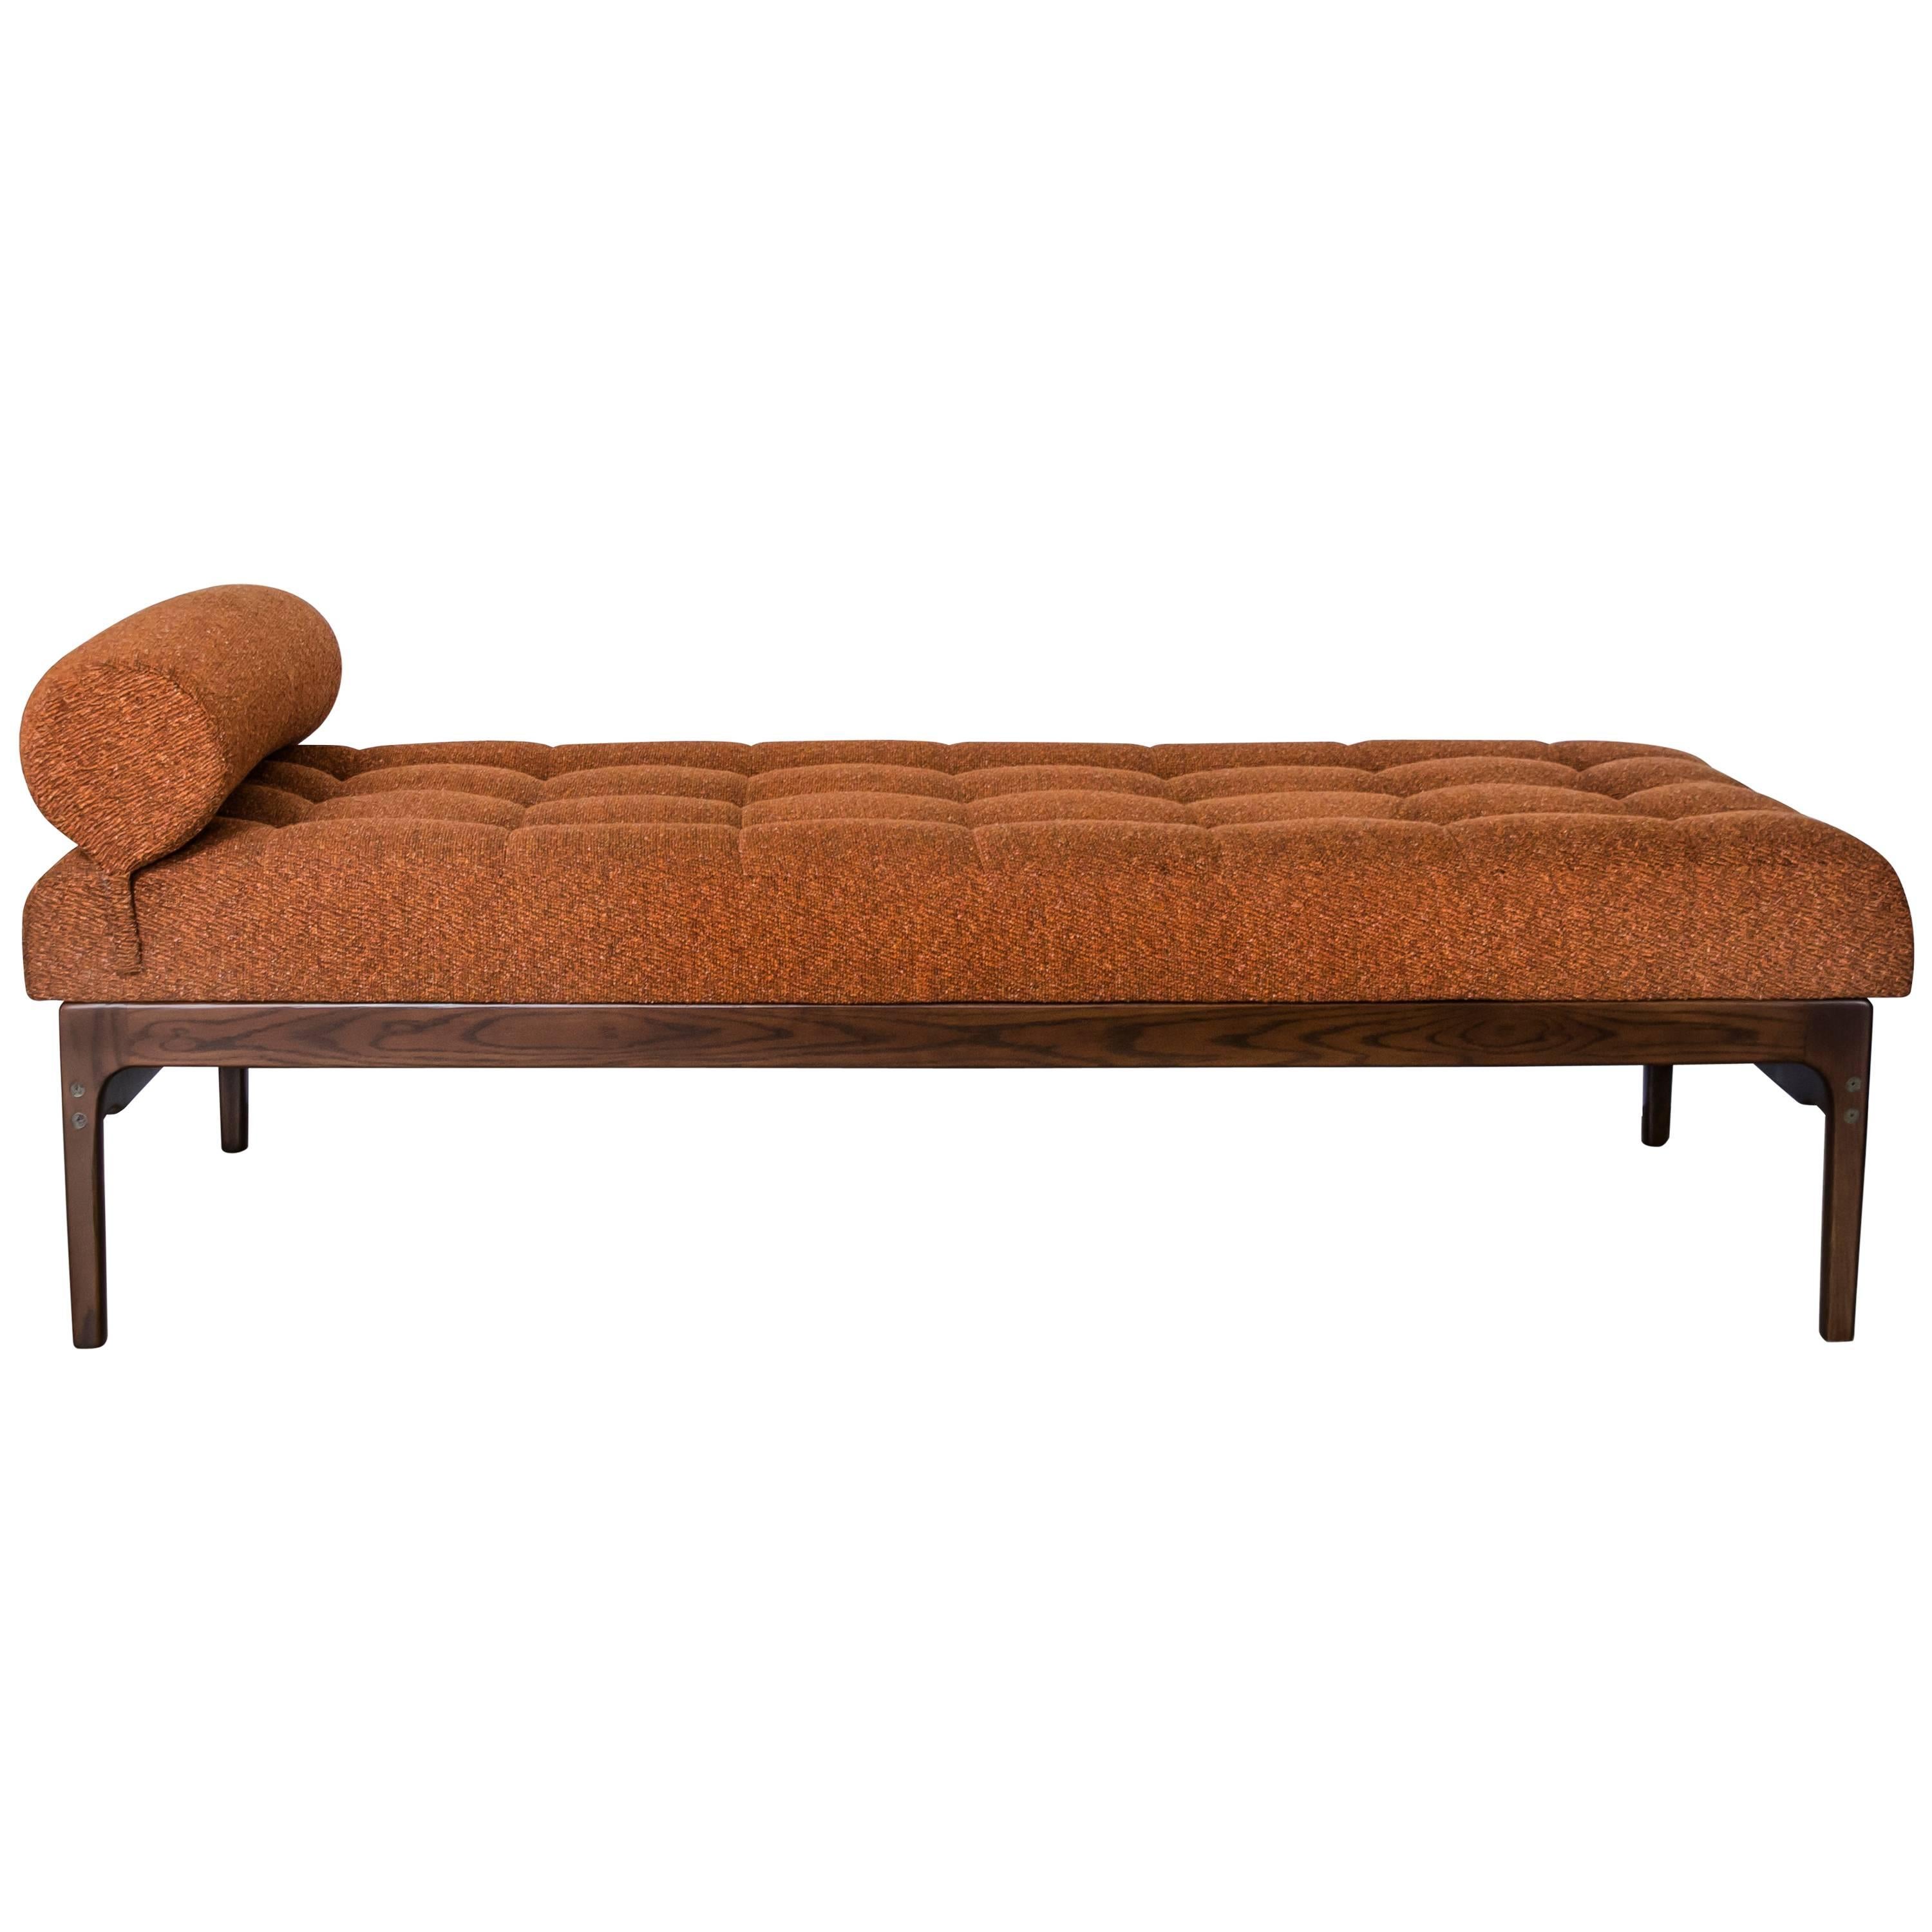 Tufted Bench with Wood Base in the Style of the Barcelona Daybed